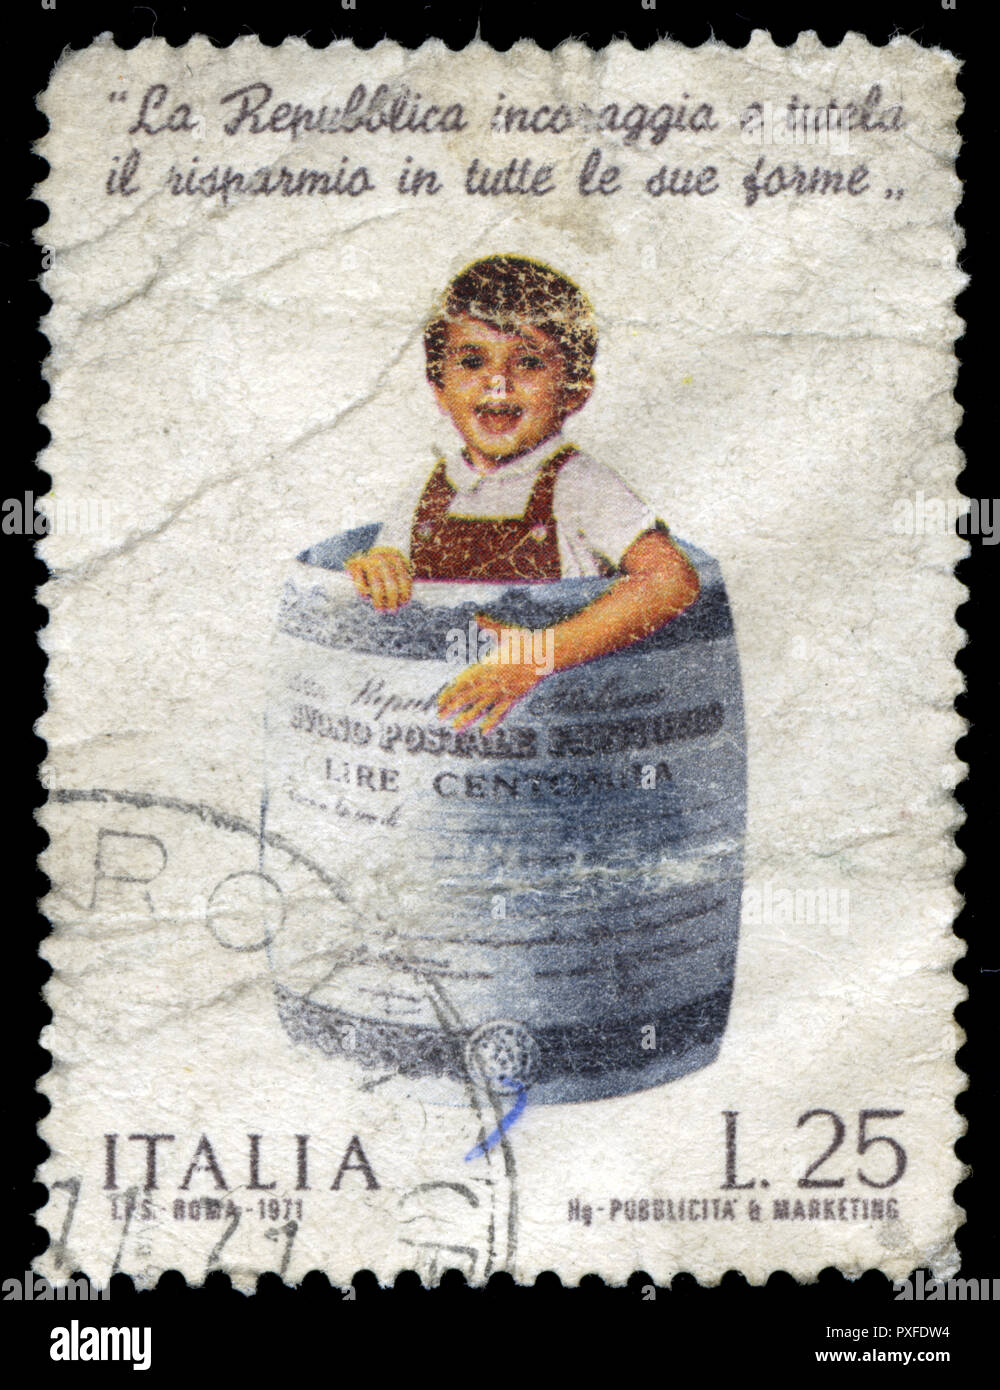 Postmarked stamp from Italy in the  Postal Savings Bank series issued in 1971 Stock Photo